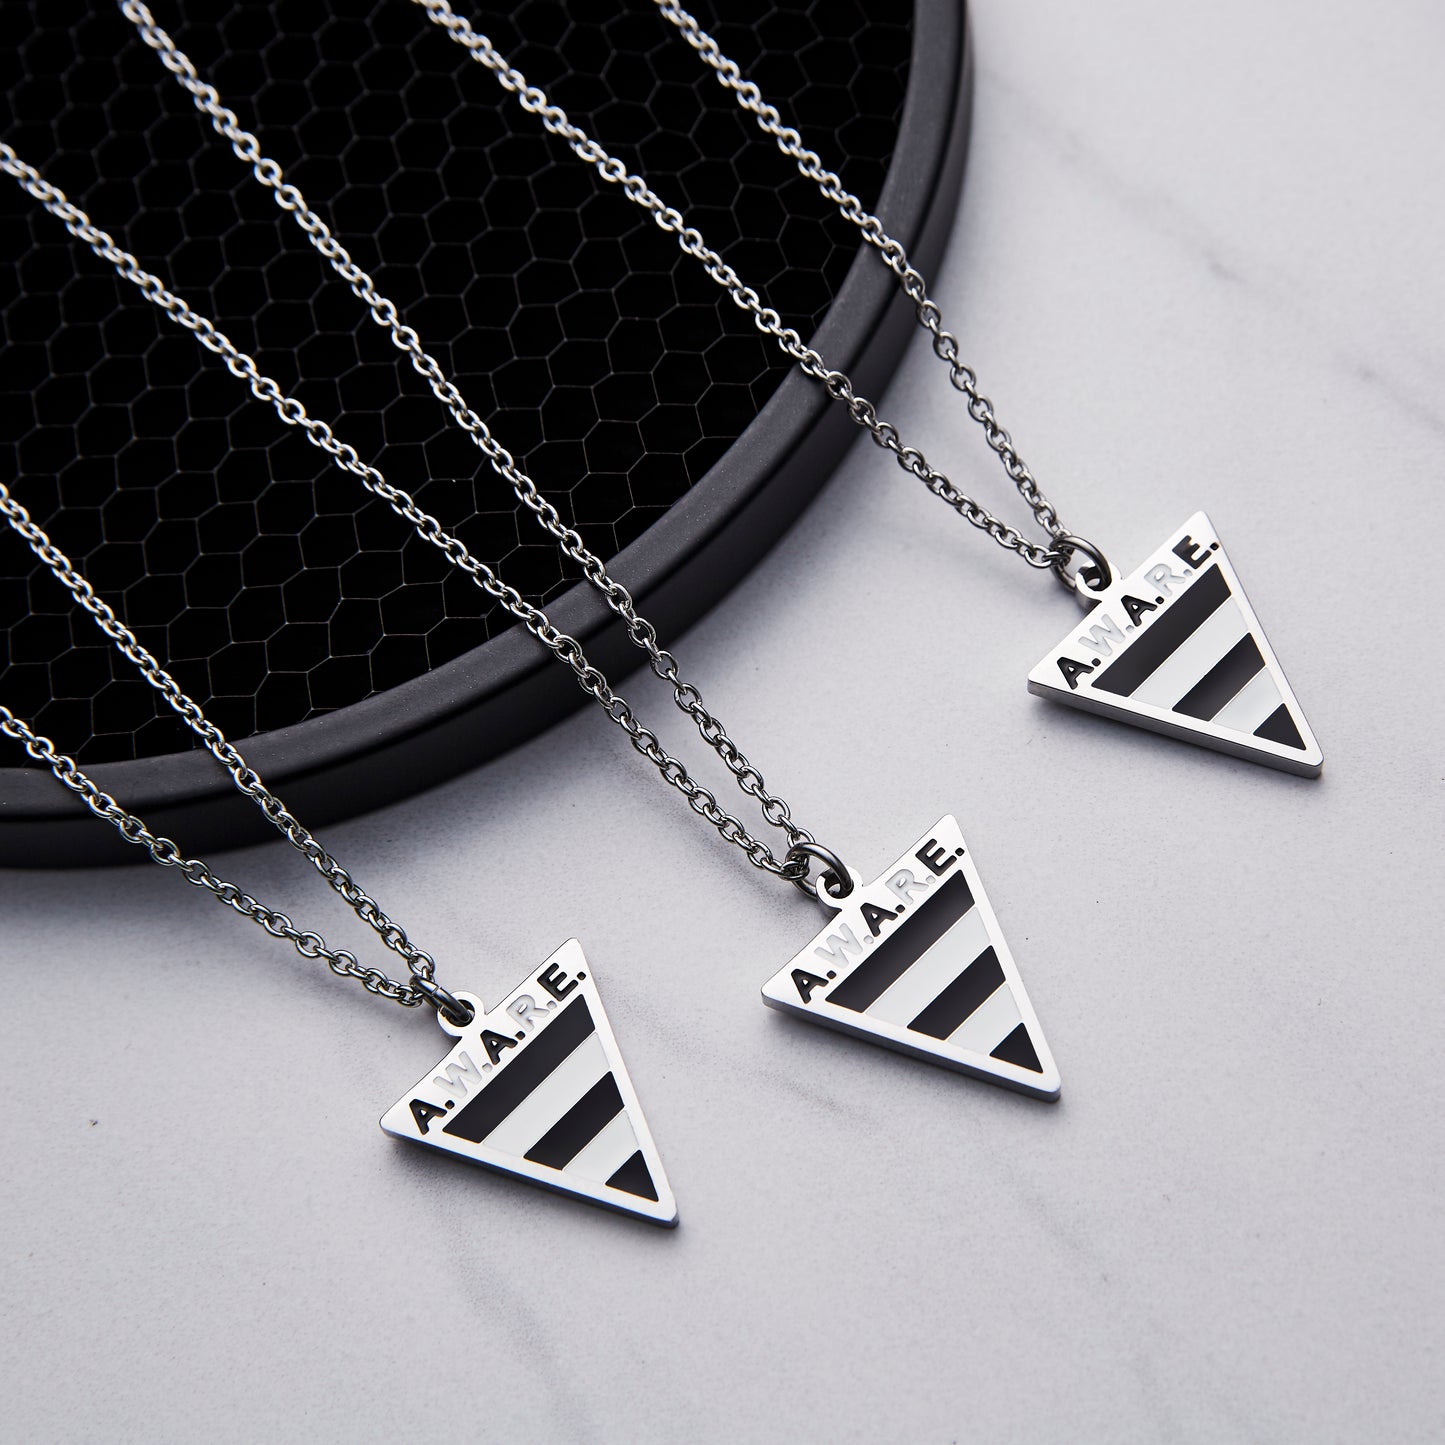 Black and White AWARE Necklaces